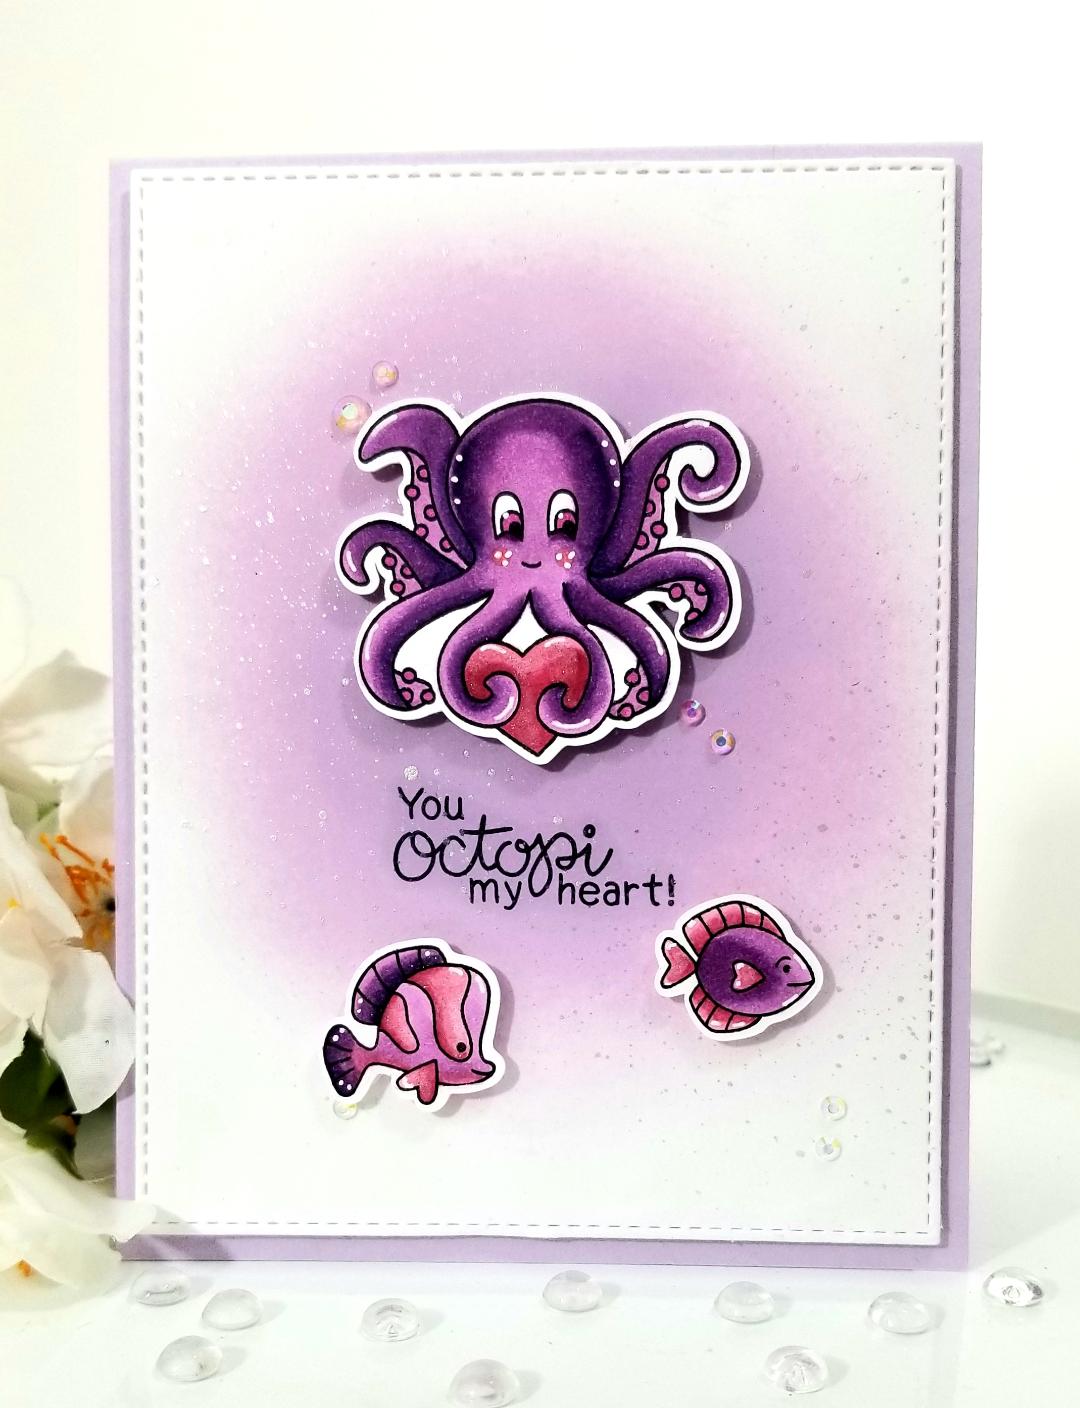 You Octopi My Heart Card by February Guest Designer Lori U'ren | Tides of Love Stamp Set by Newton's Nook Designs #newtonsnook #handmade